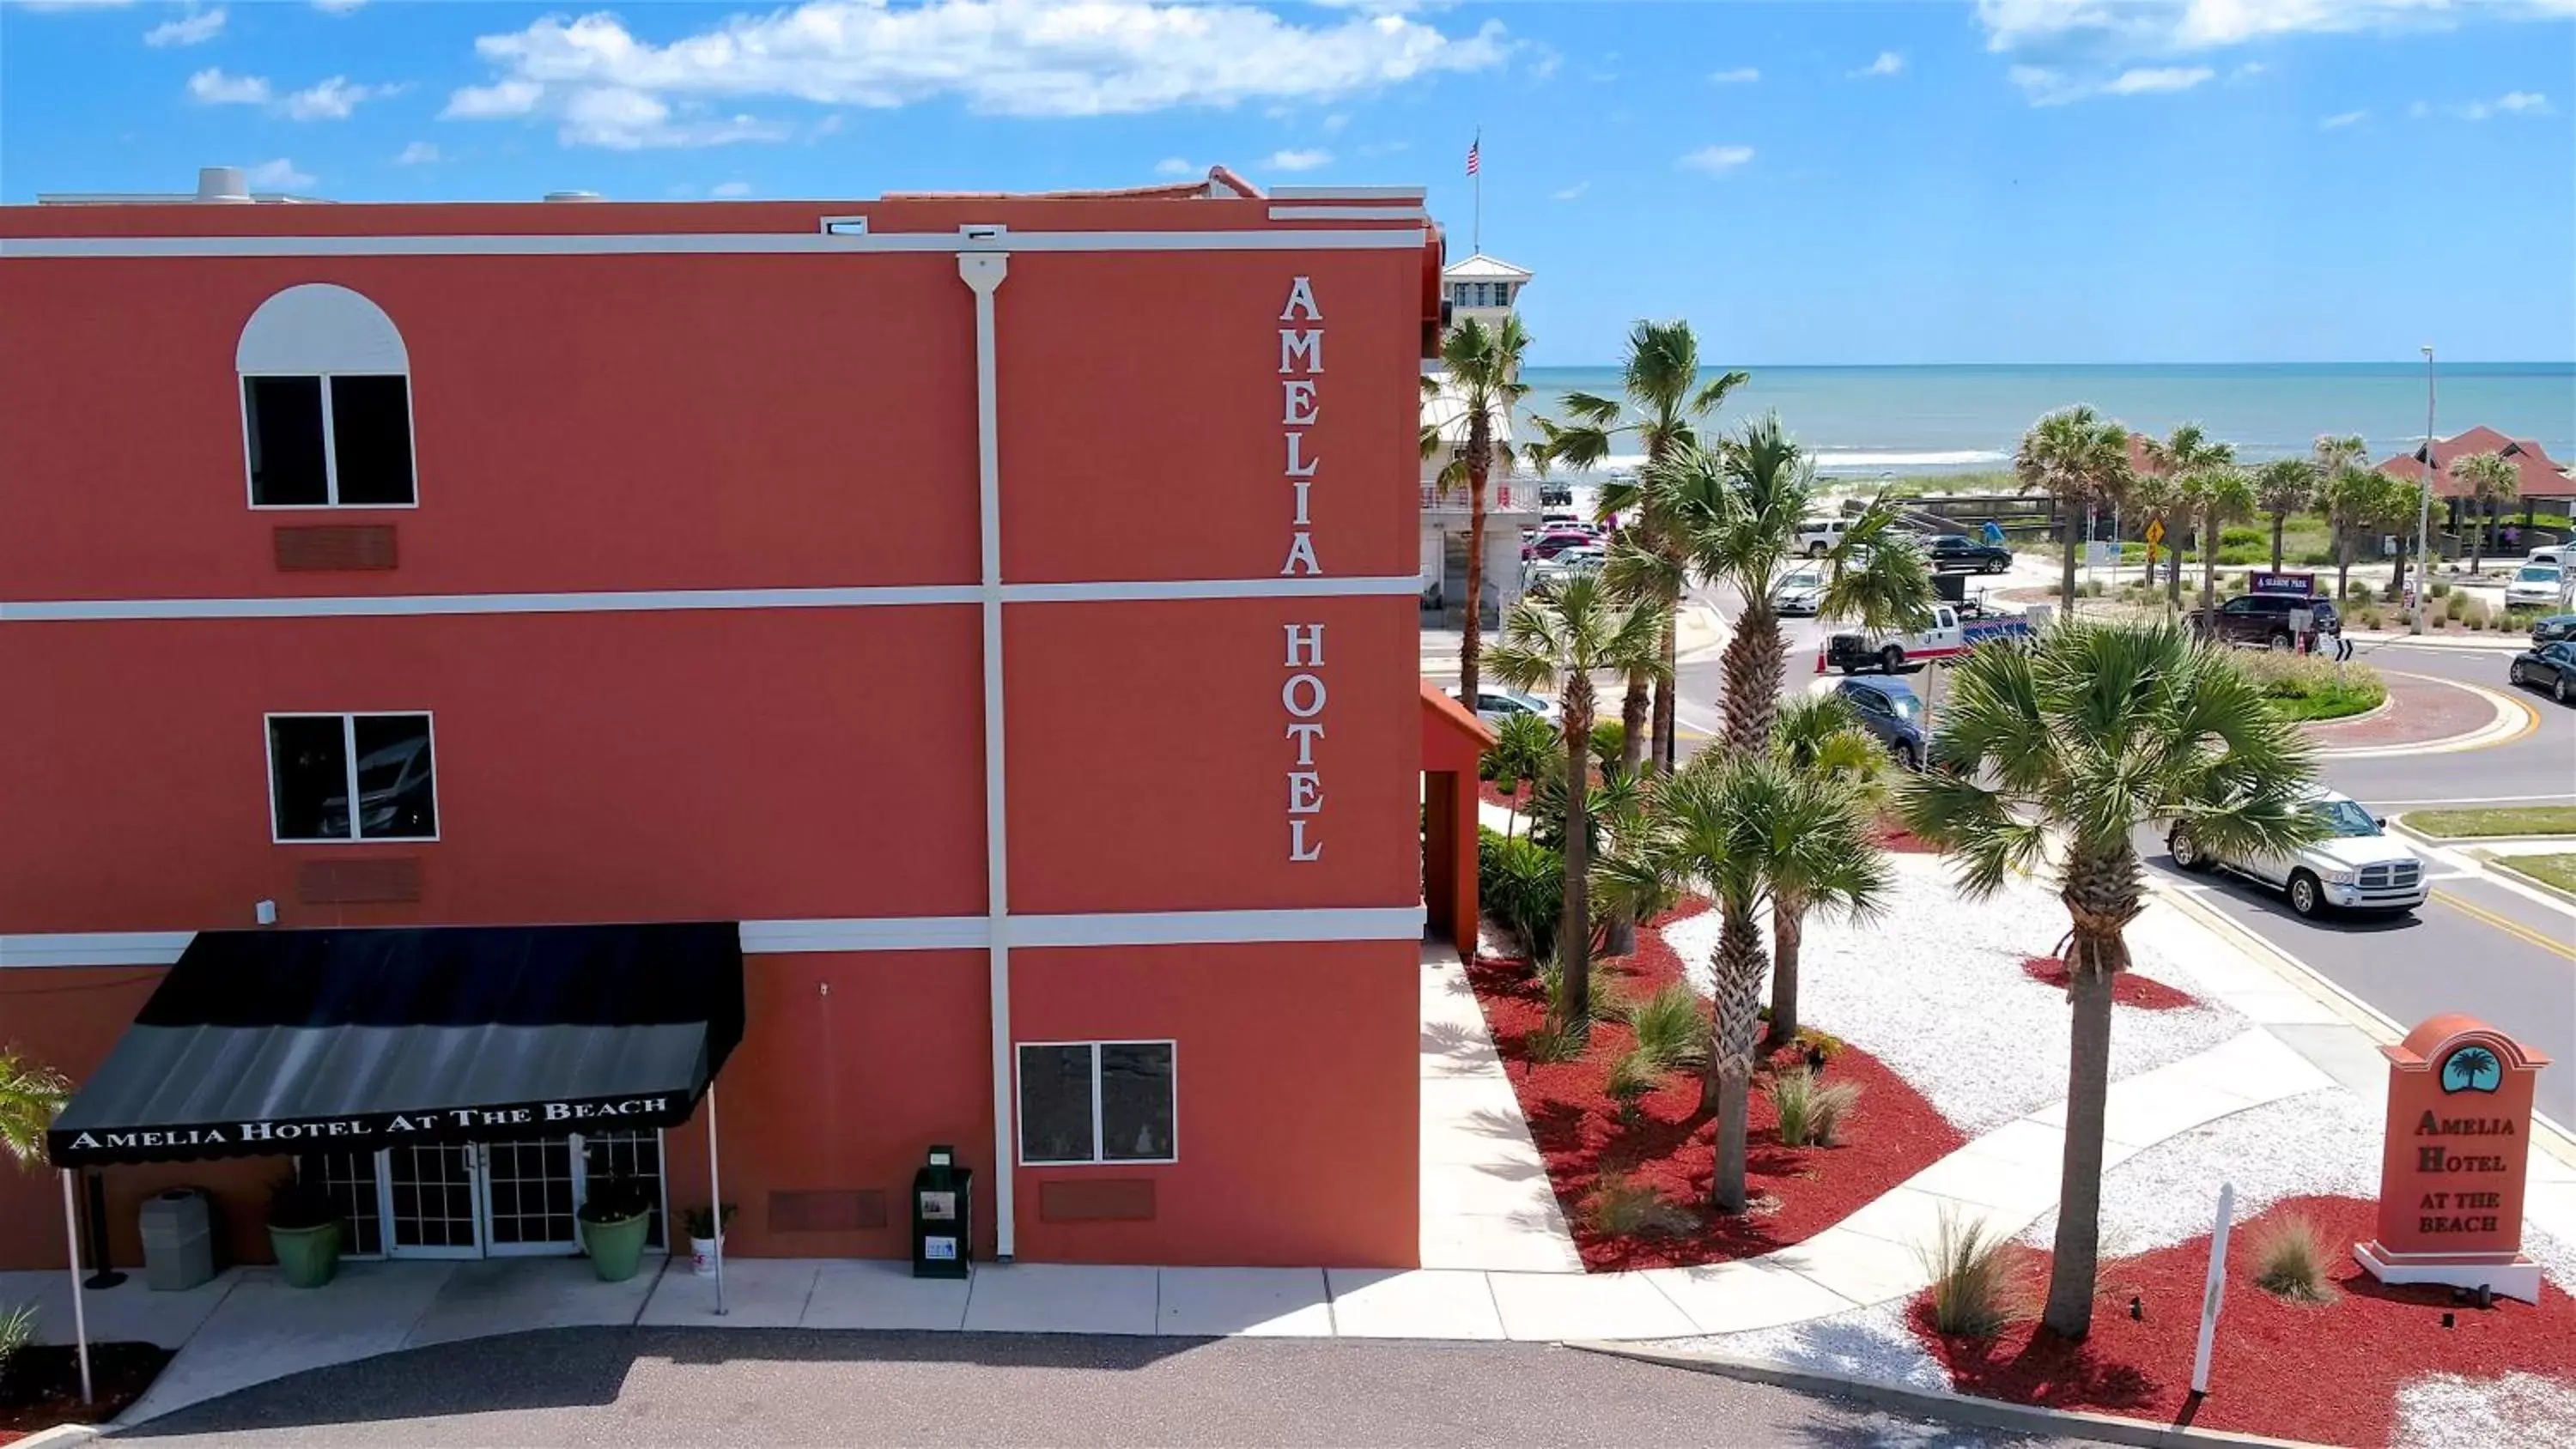 Property building in Amelia Hotel at the Beach